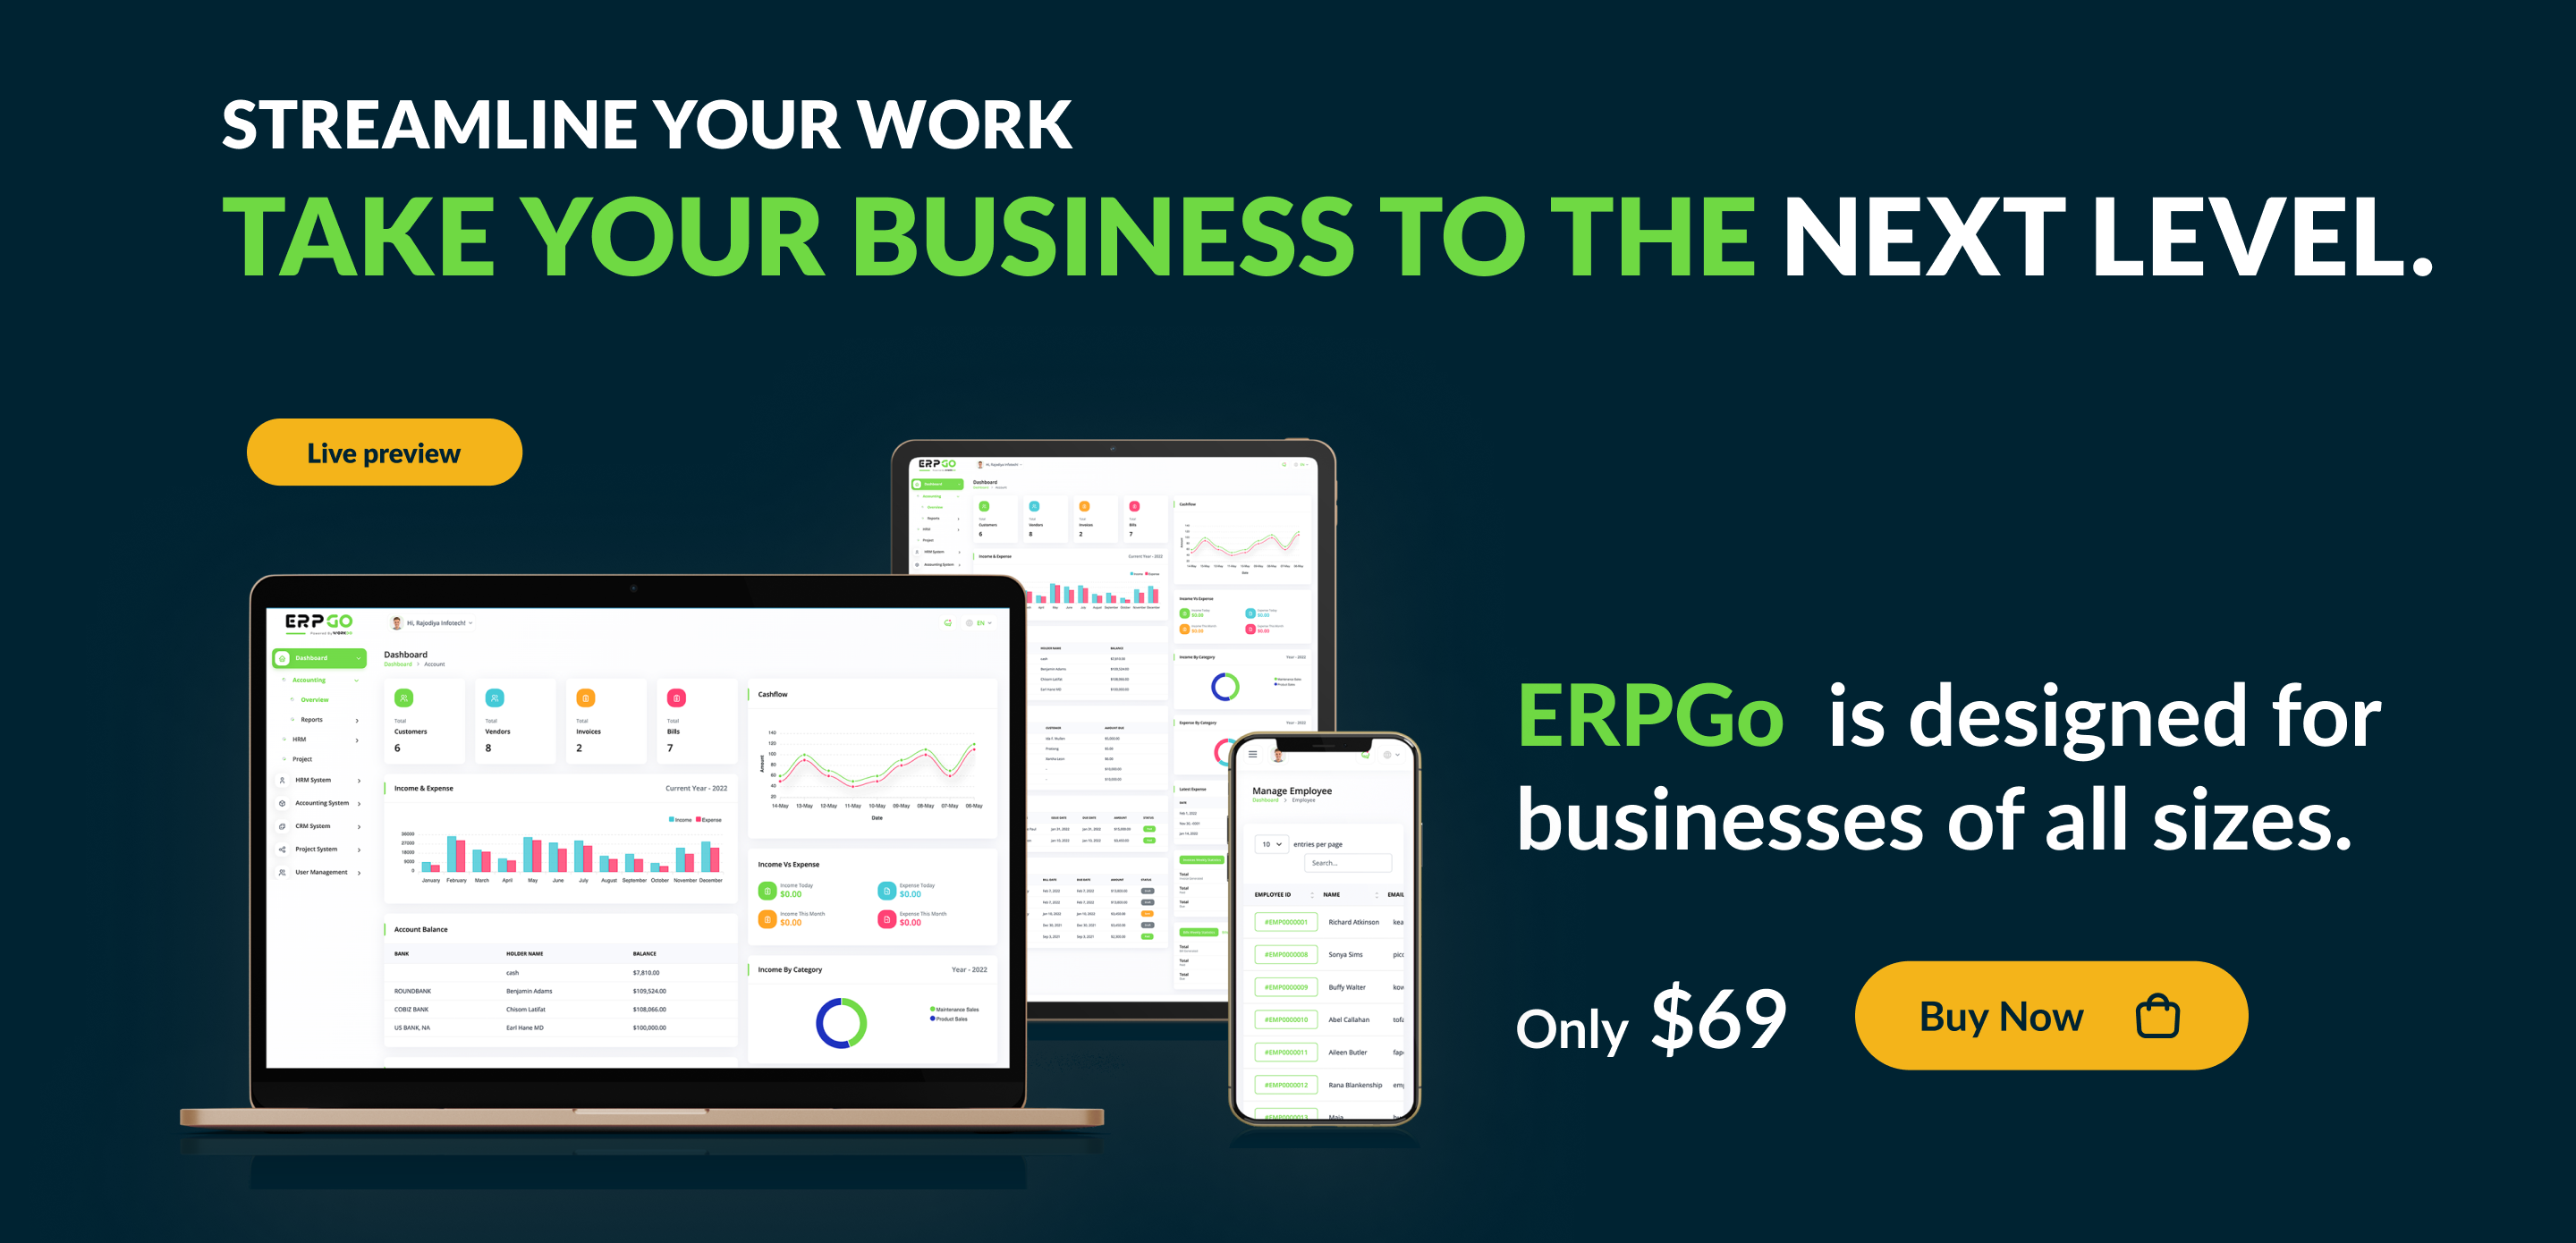 ERPGo SaaS - All In One Business ERP With Project, Account, HRM, CRM & POS - 8